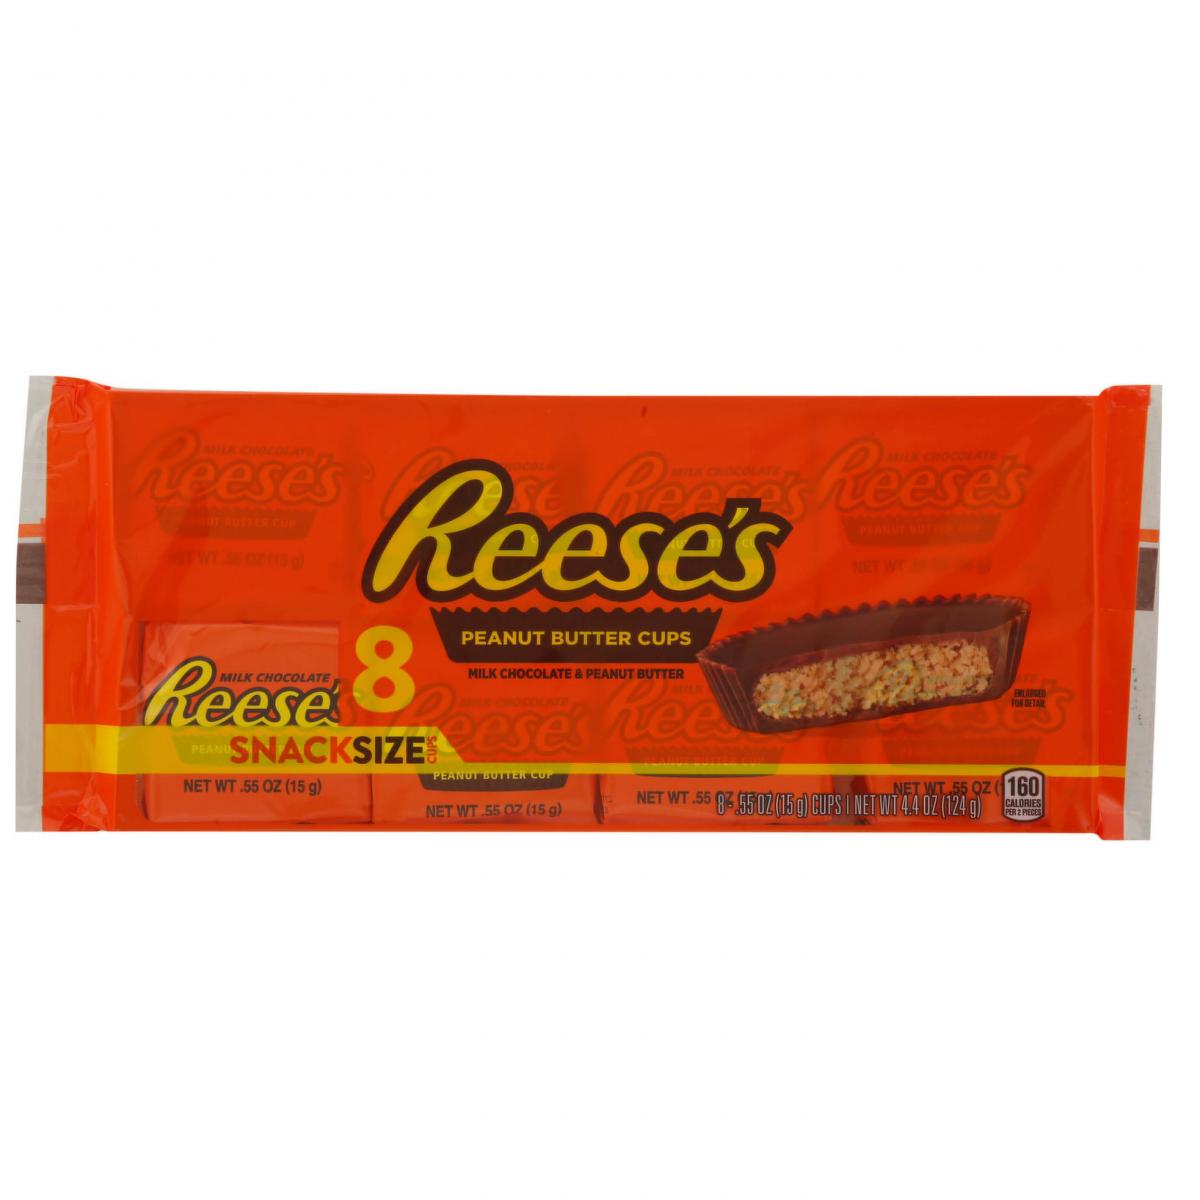  Reese's 8 Peanut Butter Cups 124g